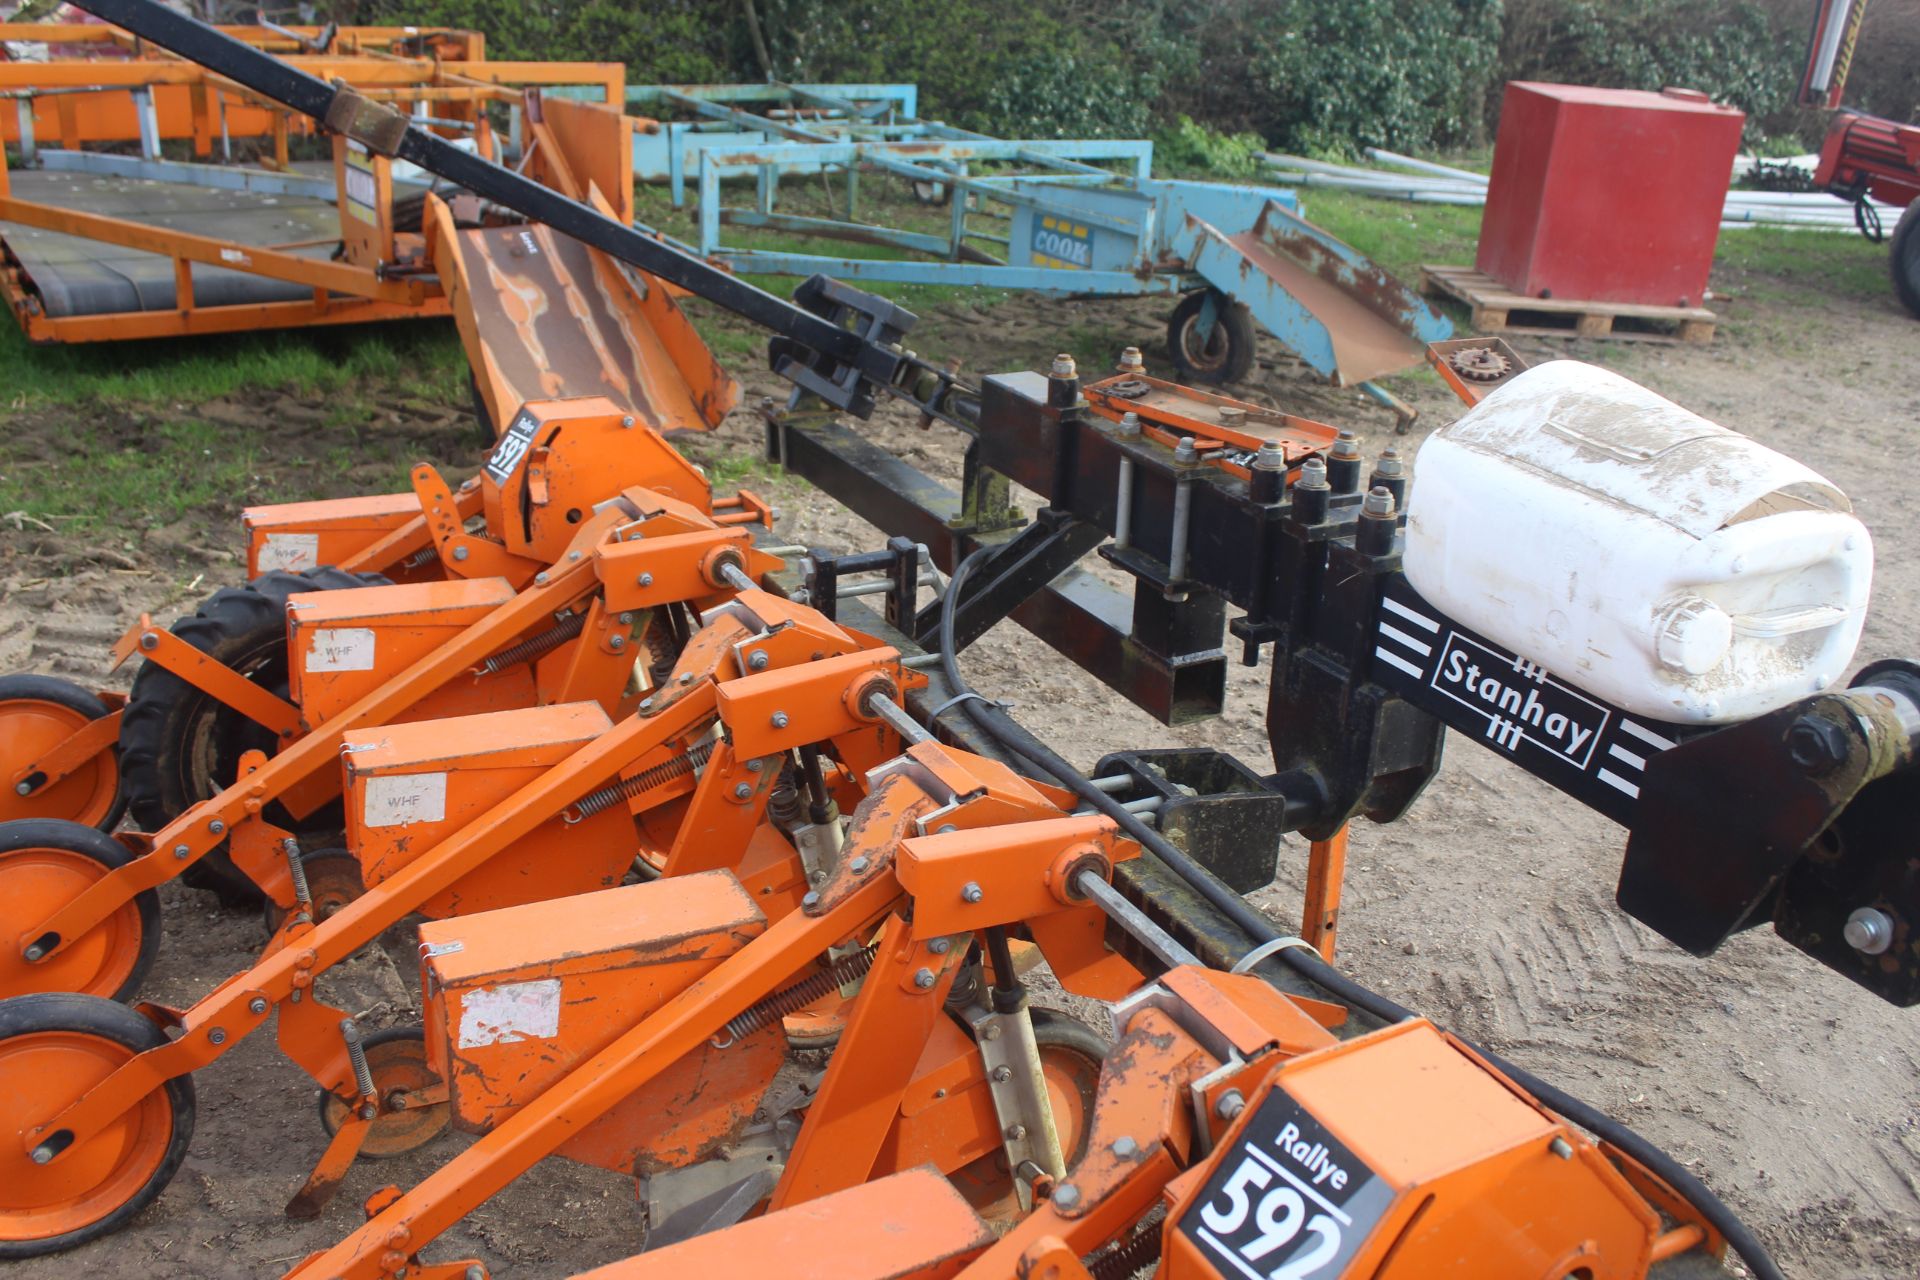 Stanhay Rallye 592 hdraulic folding 12 row beet drill. With bout markers. For spares or repair. V - Bild 17 aus 26